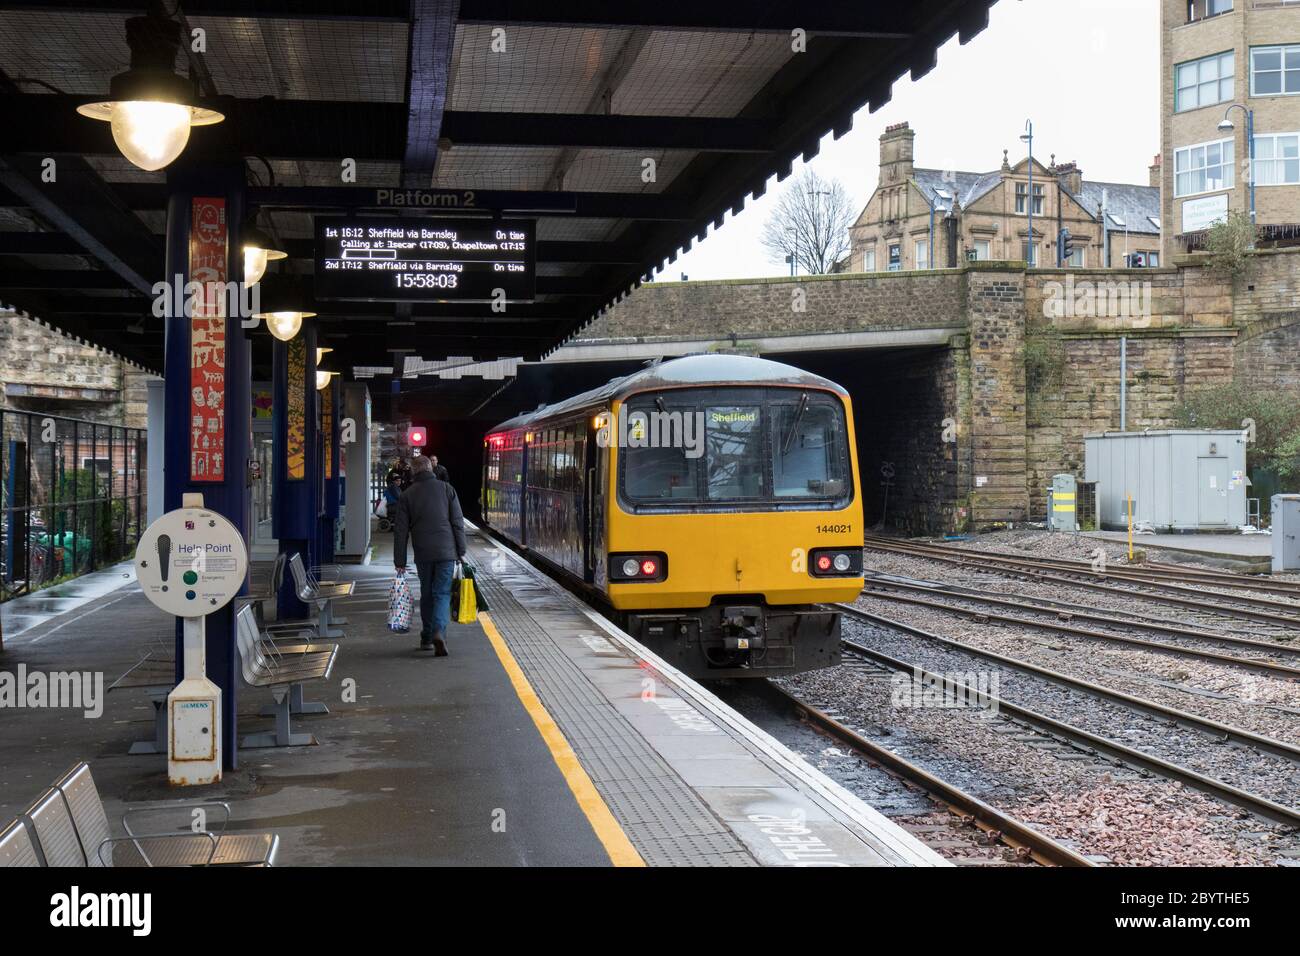 A pacer diesel passenger train at Huddersfield Railway Station Stock Photo